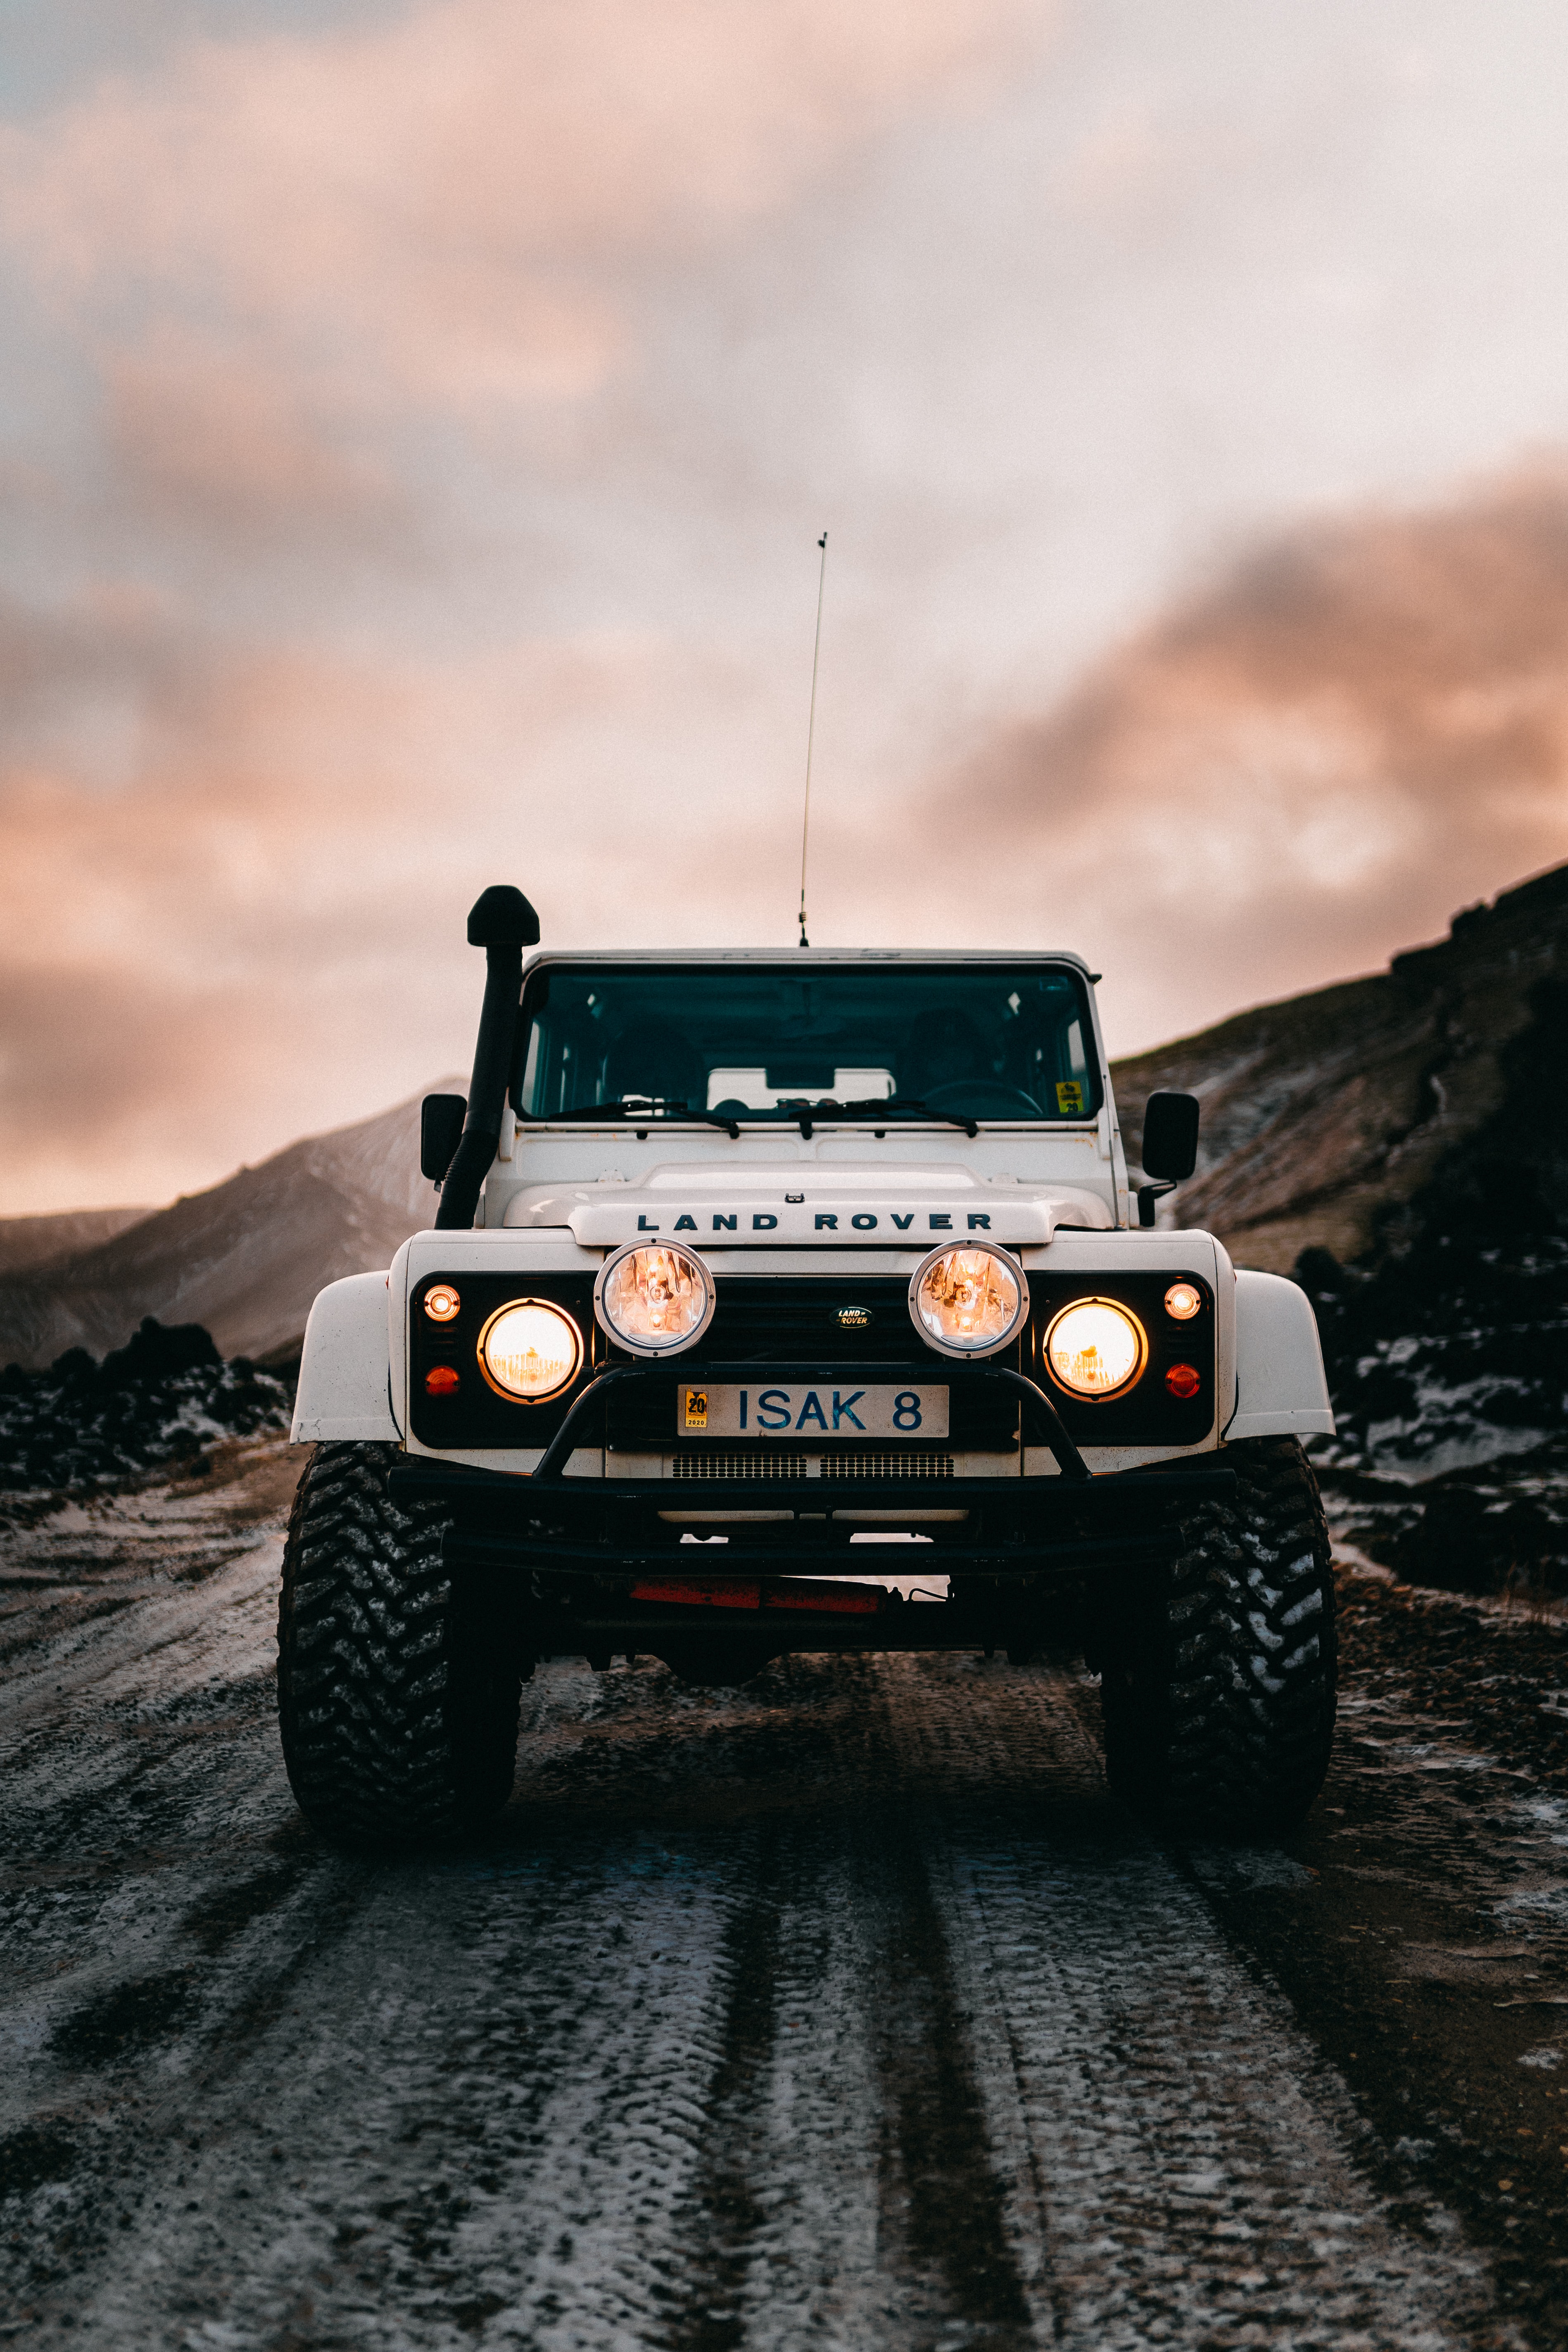 land rover, cars, lights, front view, white, car, machine, headlights iphone wallpaper